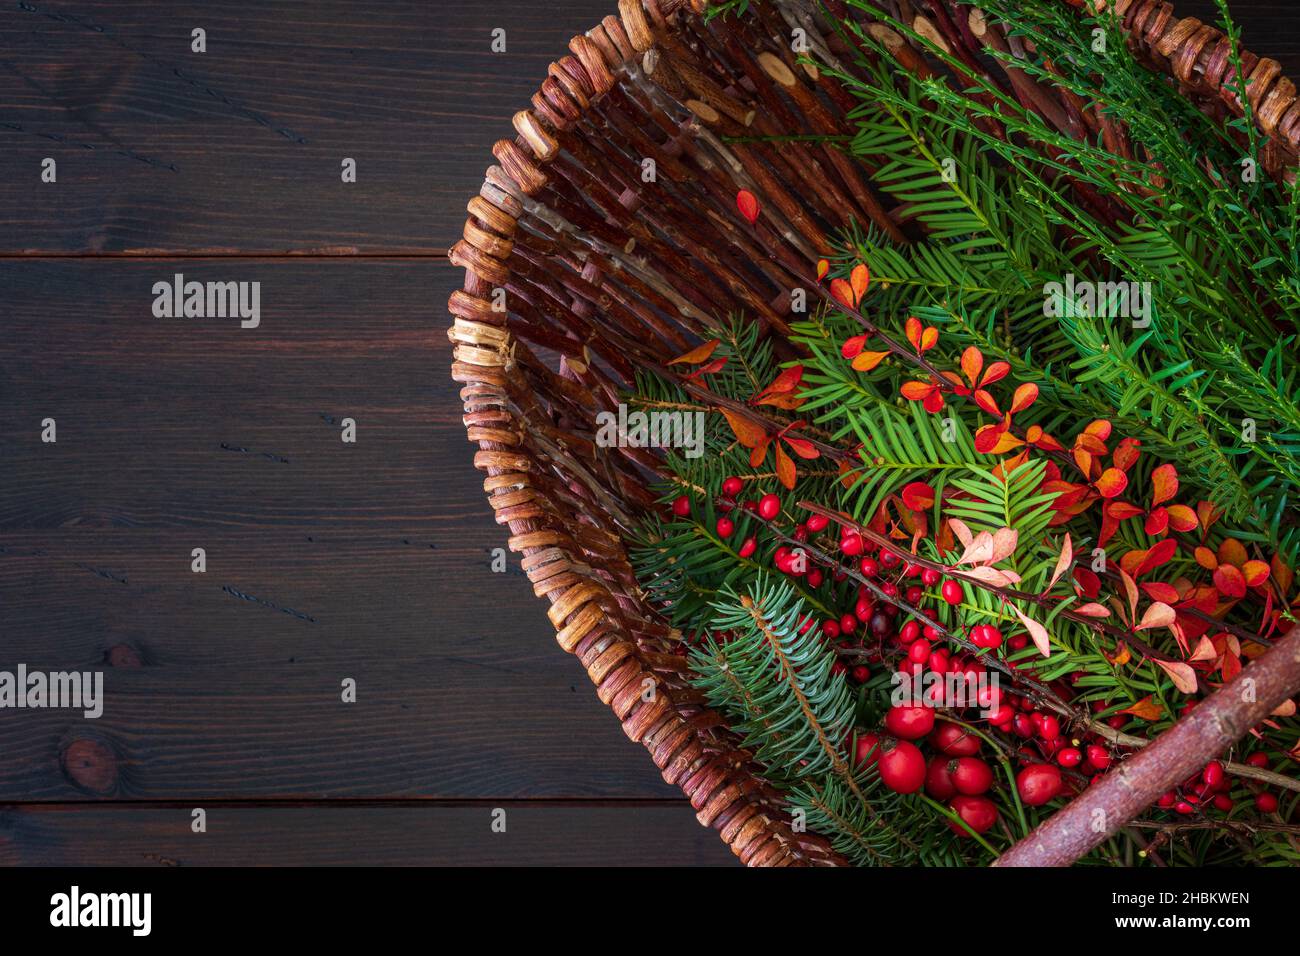 Selection of winter branches in wicker basket on dark brown rustic wooden background. Evergreen fir and yew branches with rose hips. Winter background. Stock Photo